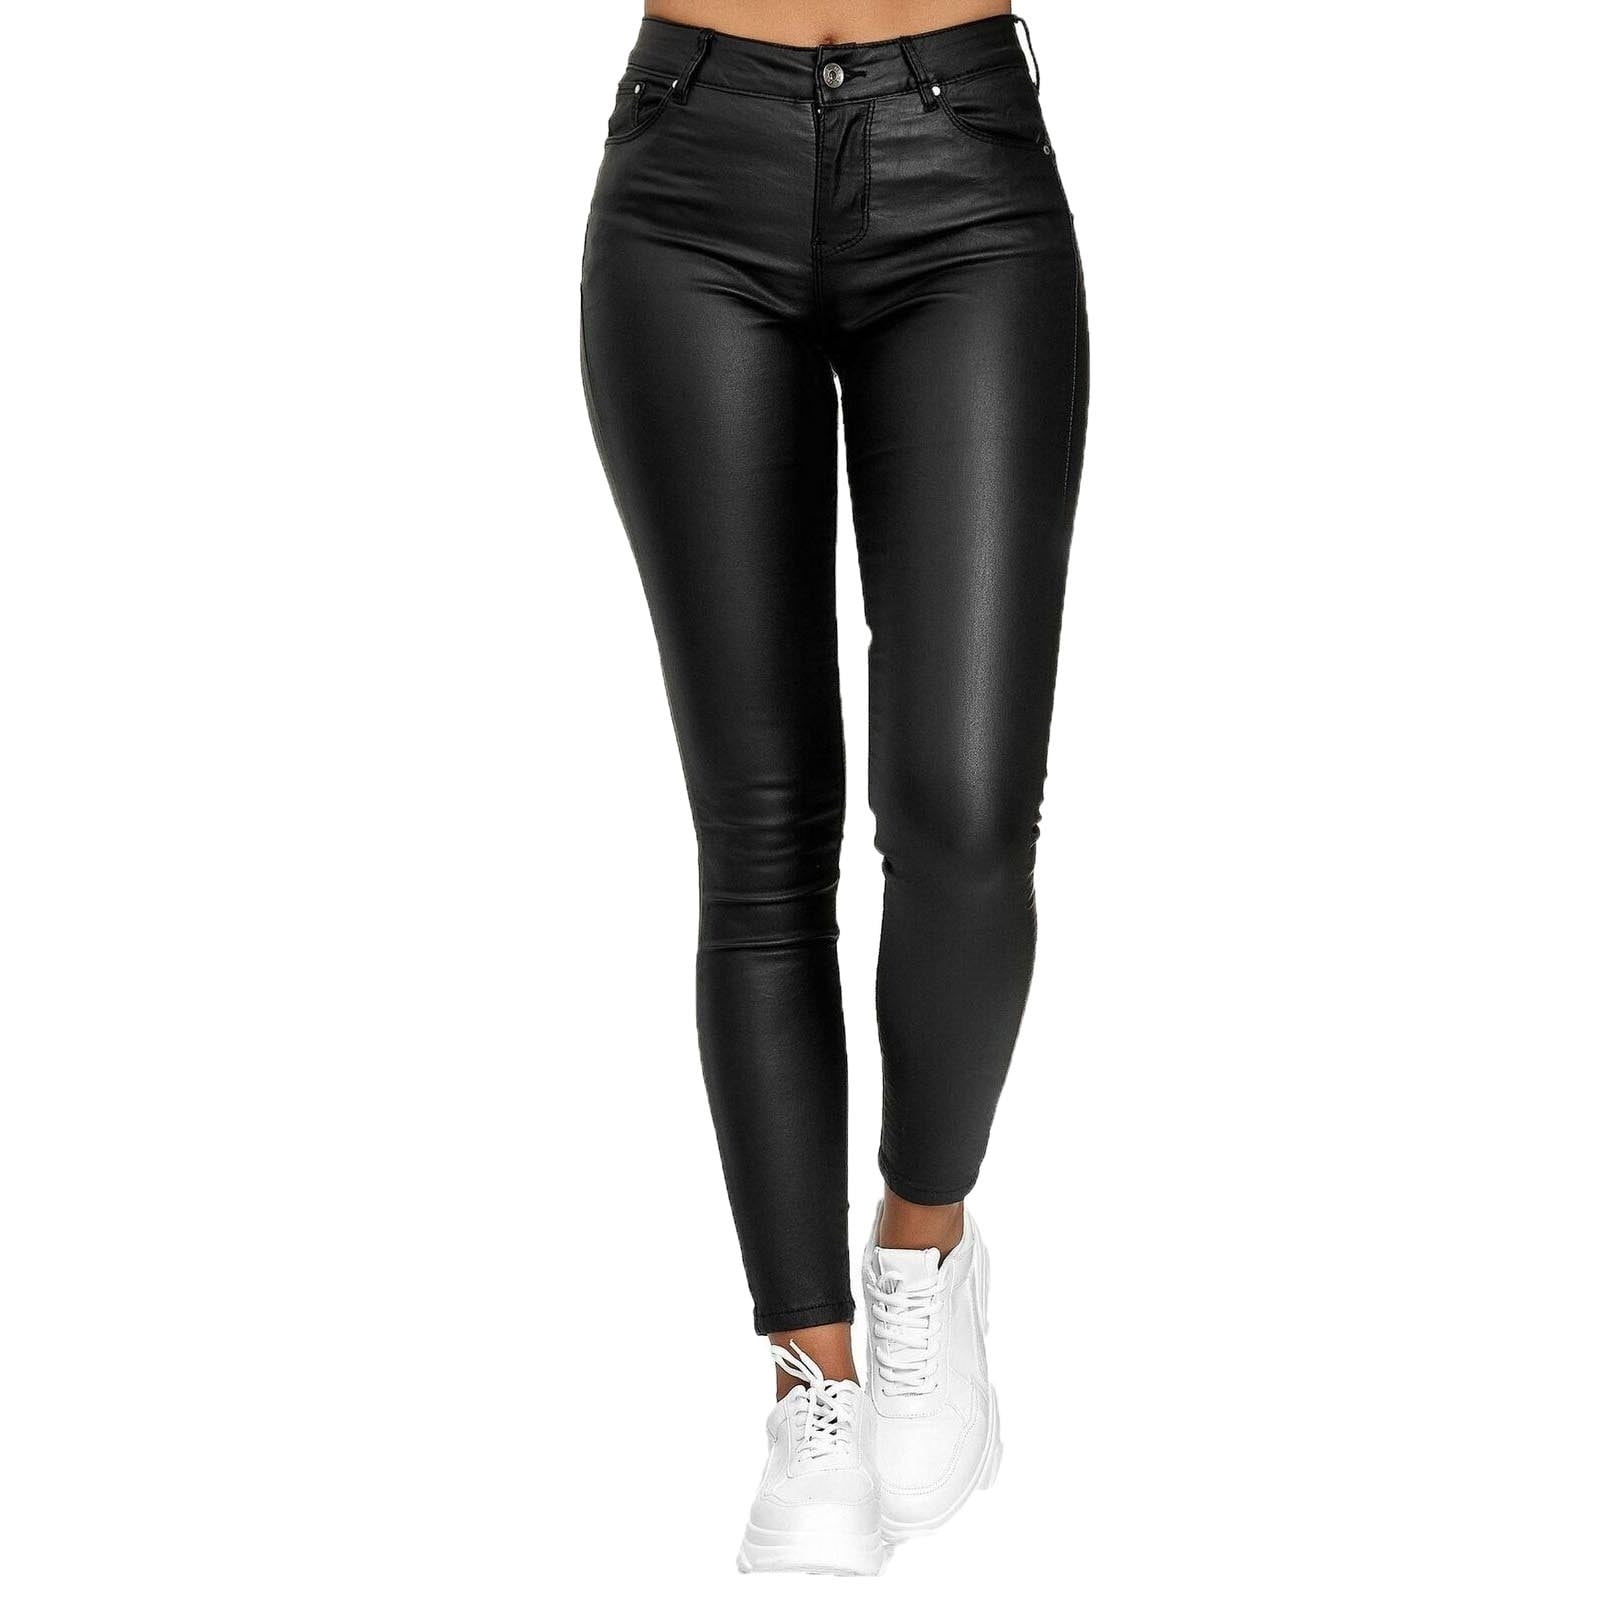 YWDJ Leather Pants for Women Plus Size Tummy Control Fashion Solid Pockets  Drawstring Casual Mid Waist Leather Long PantsBlackM 